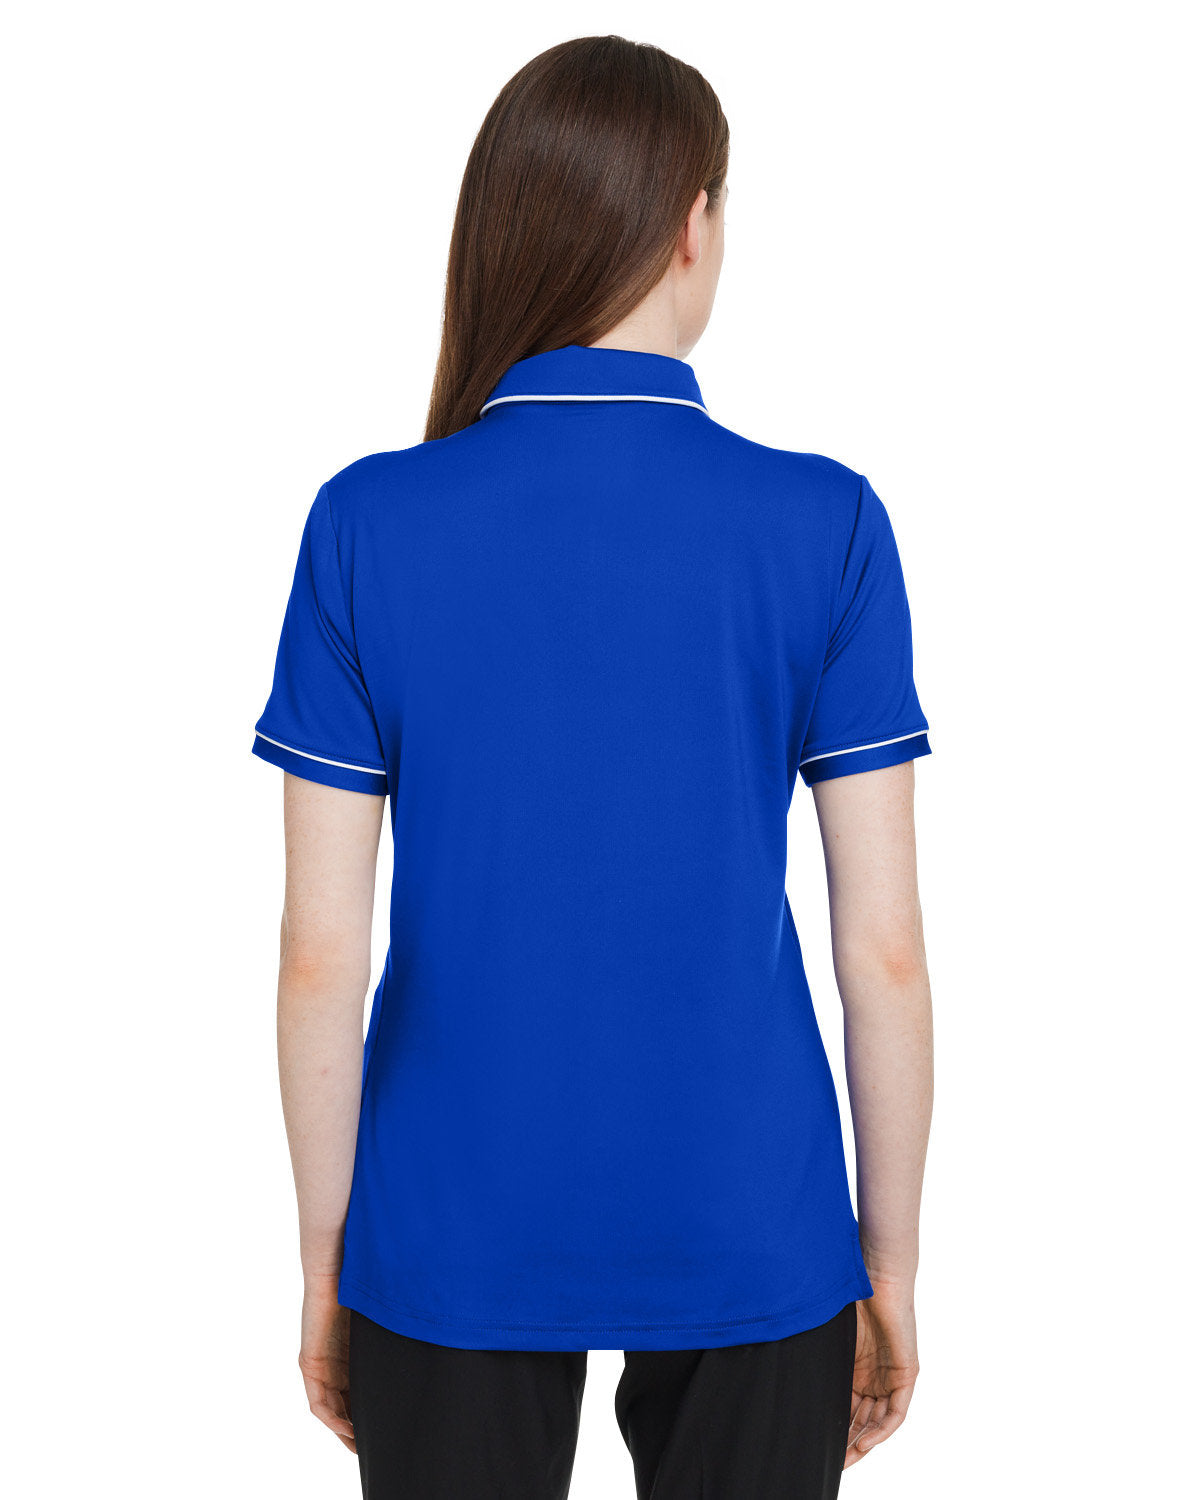 Under Armour Ladies Tipped Teams Performance Branded Polos, Royal